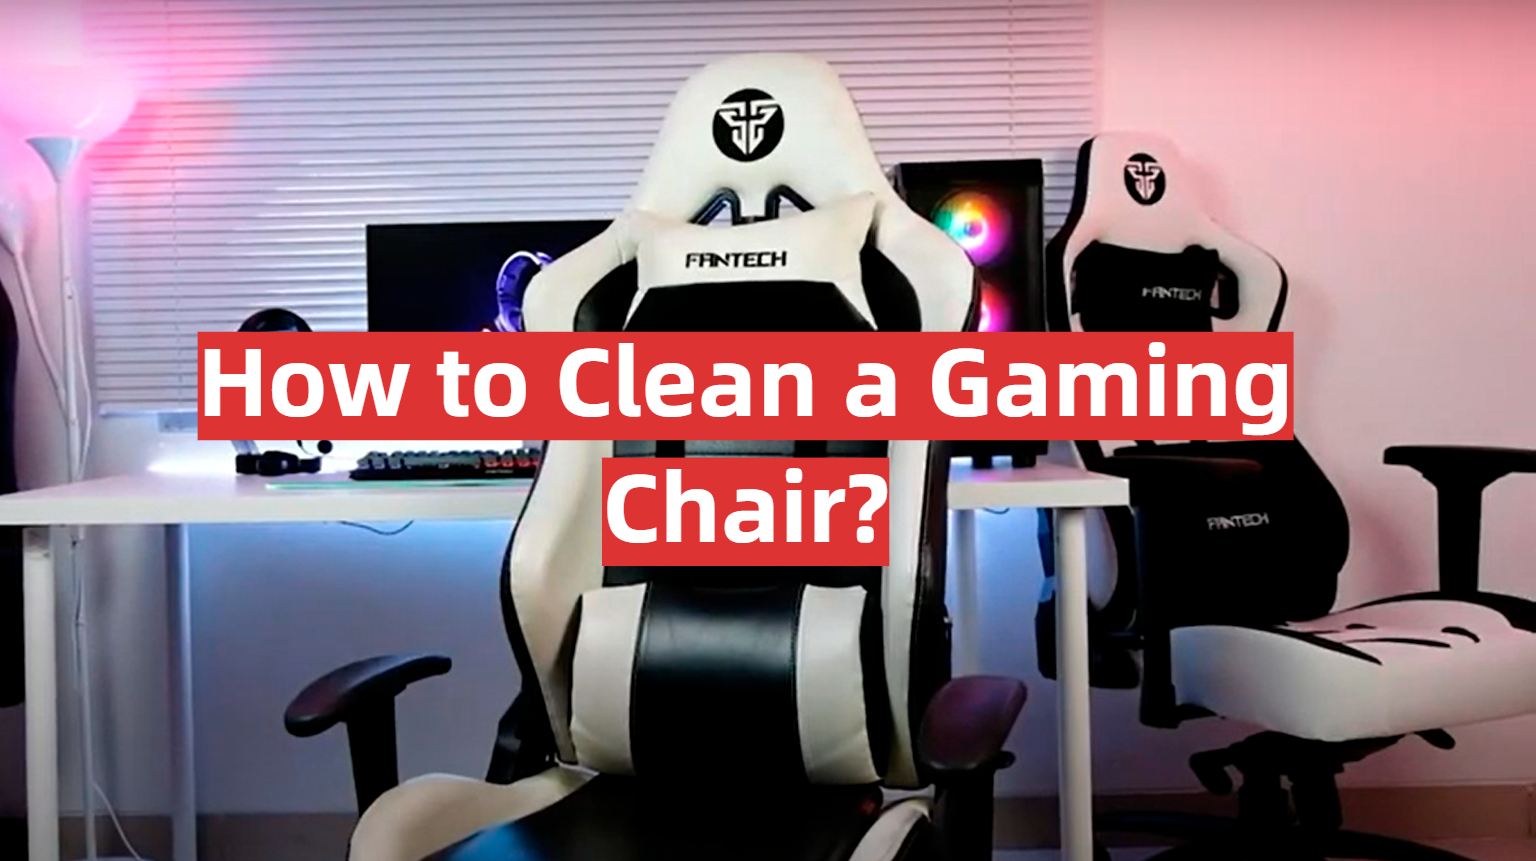 How to Clean a Gaming Chair?